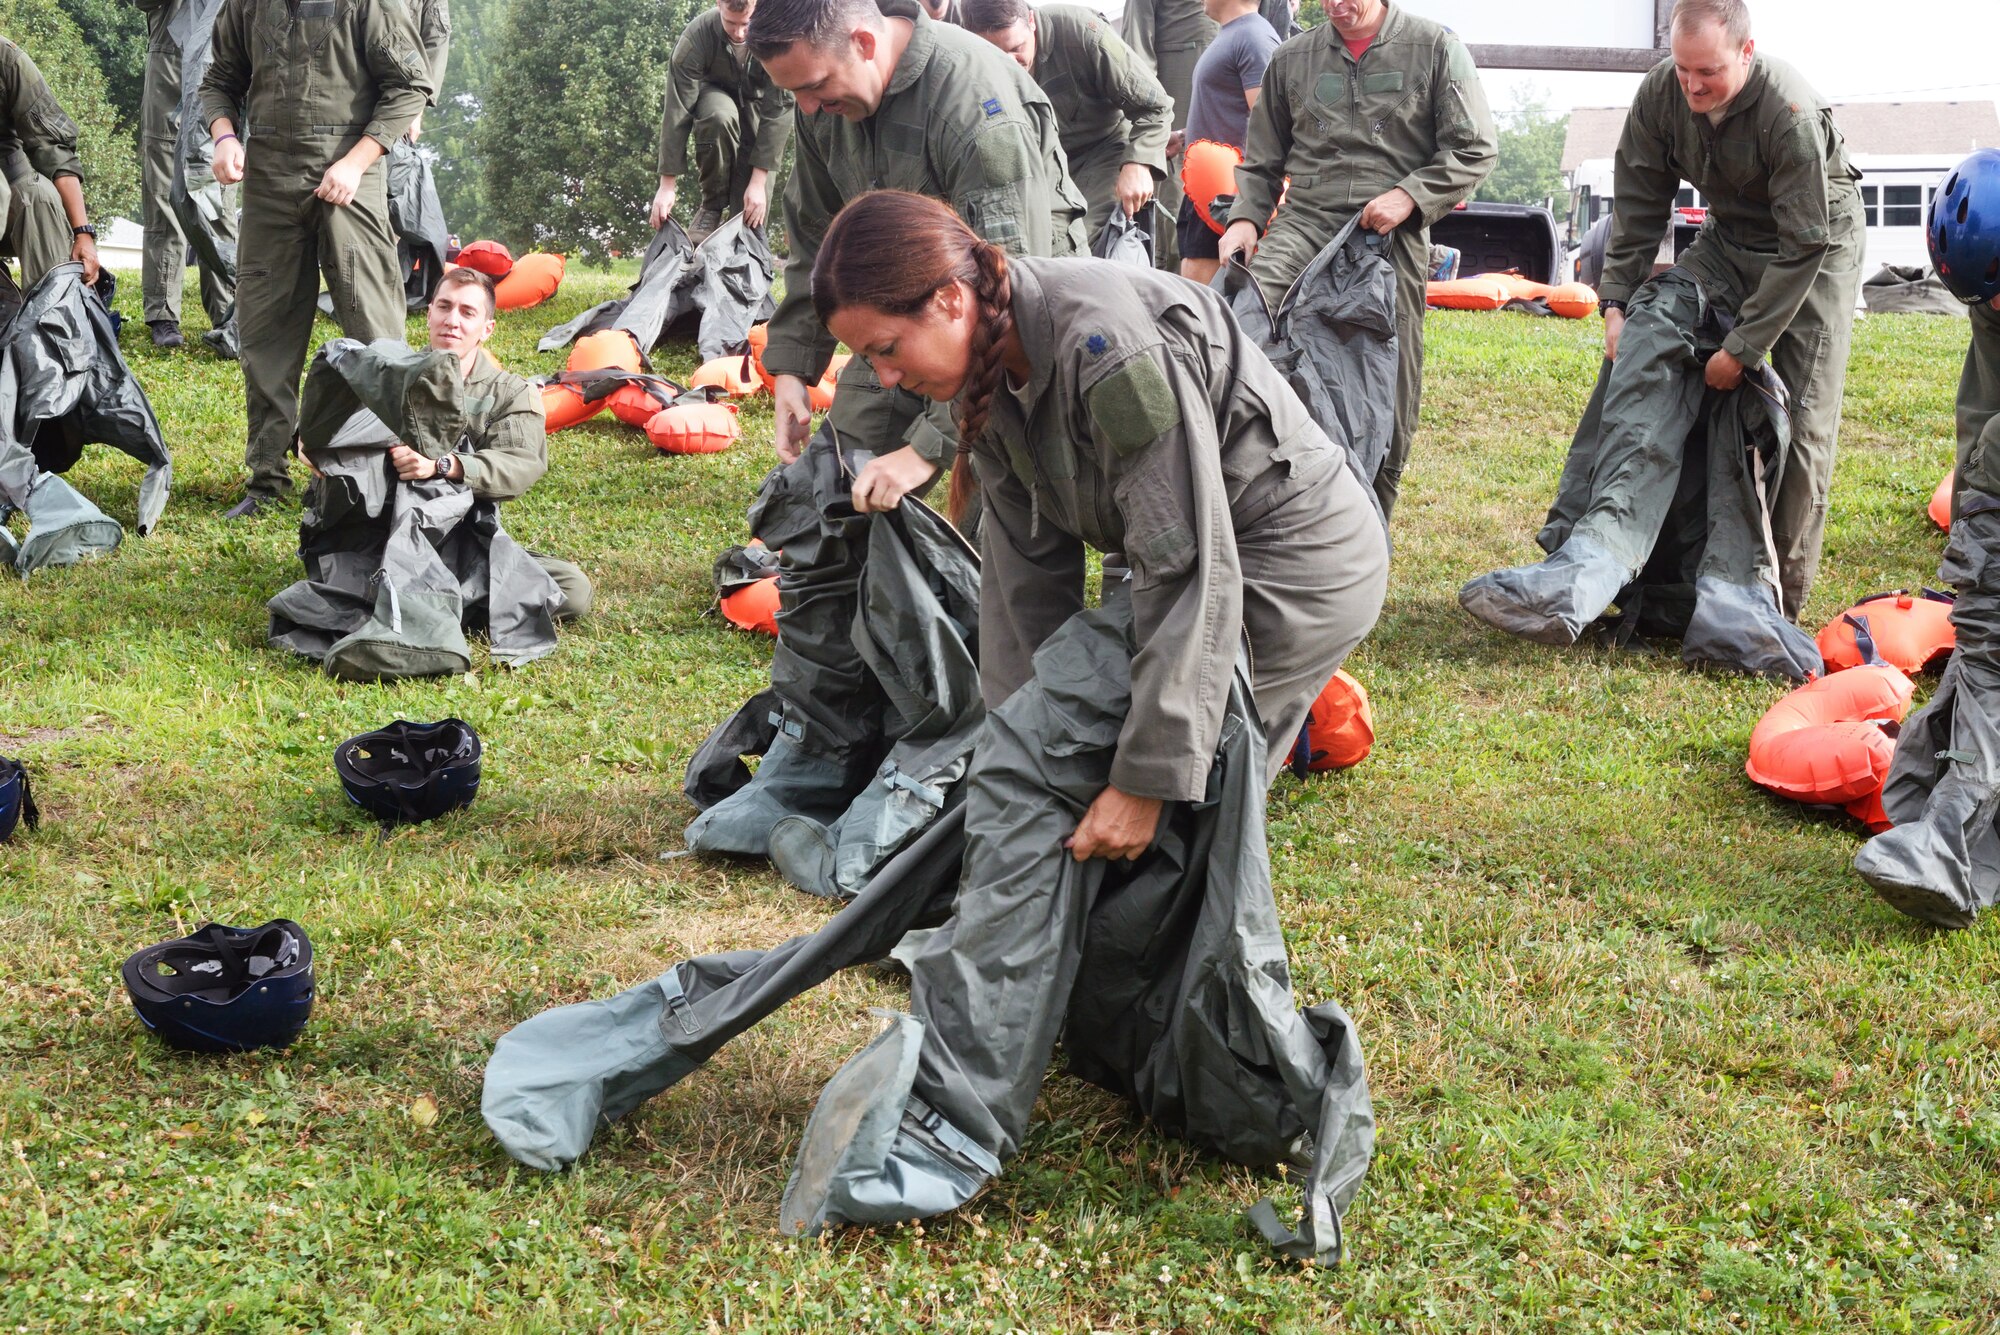 Lt. Col. Wendy Squarica, 238th Combat Training Squadron commander and Citizen Airman, dons an anti-exposure suit while participating in water survival and rescue training July 14, 2018. The suits are worn by aircrew in the eventuality they must be in water where the temperature is below 60 F. The hands-on water instruction included donning cold-water exposure suits; inflating and swimming with inflatable life preservers; and boarding and utilizing a 20-person survival raft.